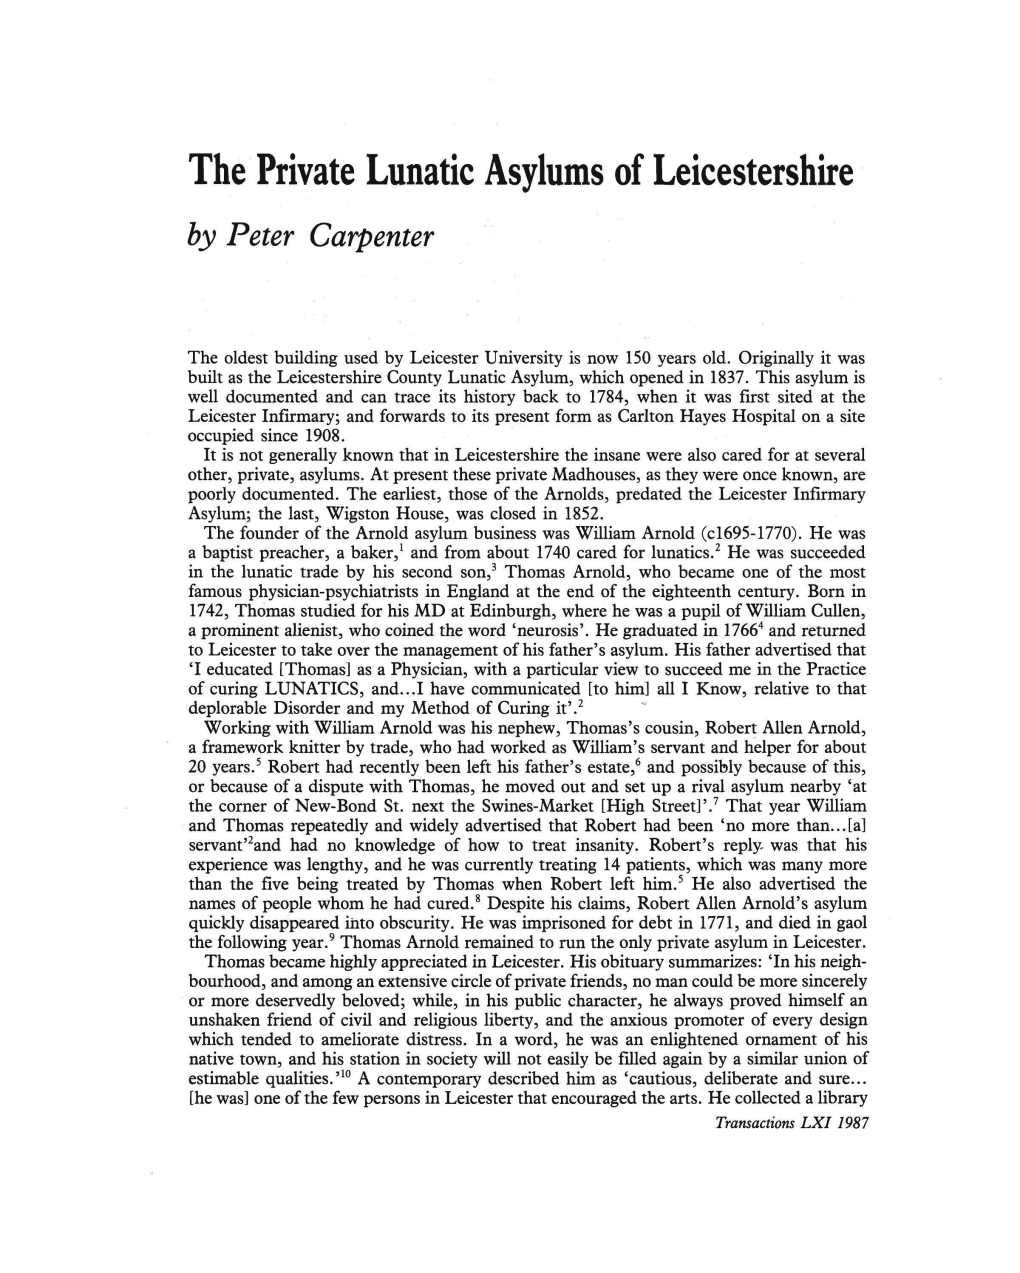 The Private Lunatic Asylums of Leicestershire by Peter Carpenter